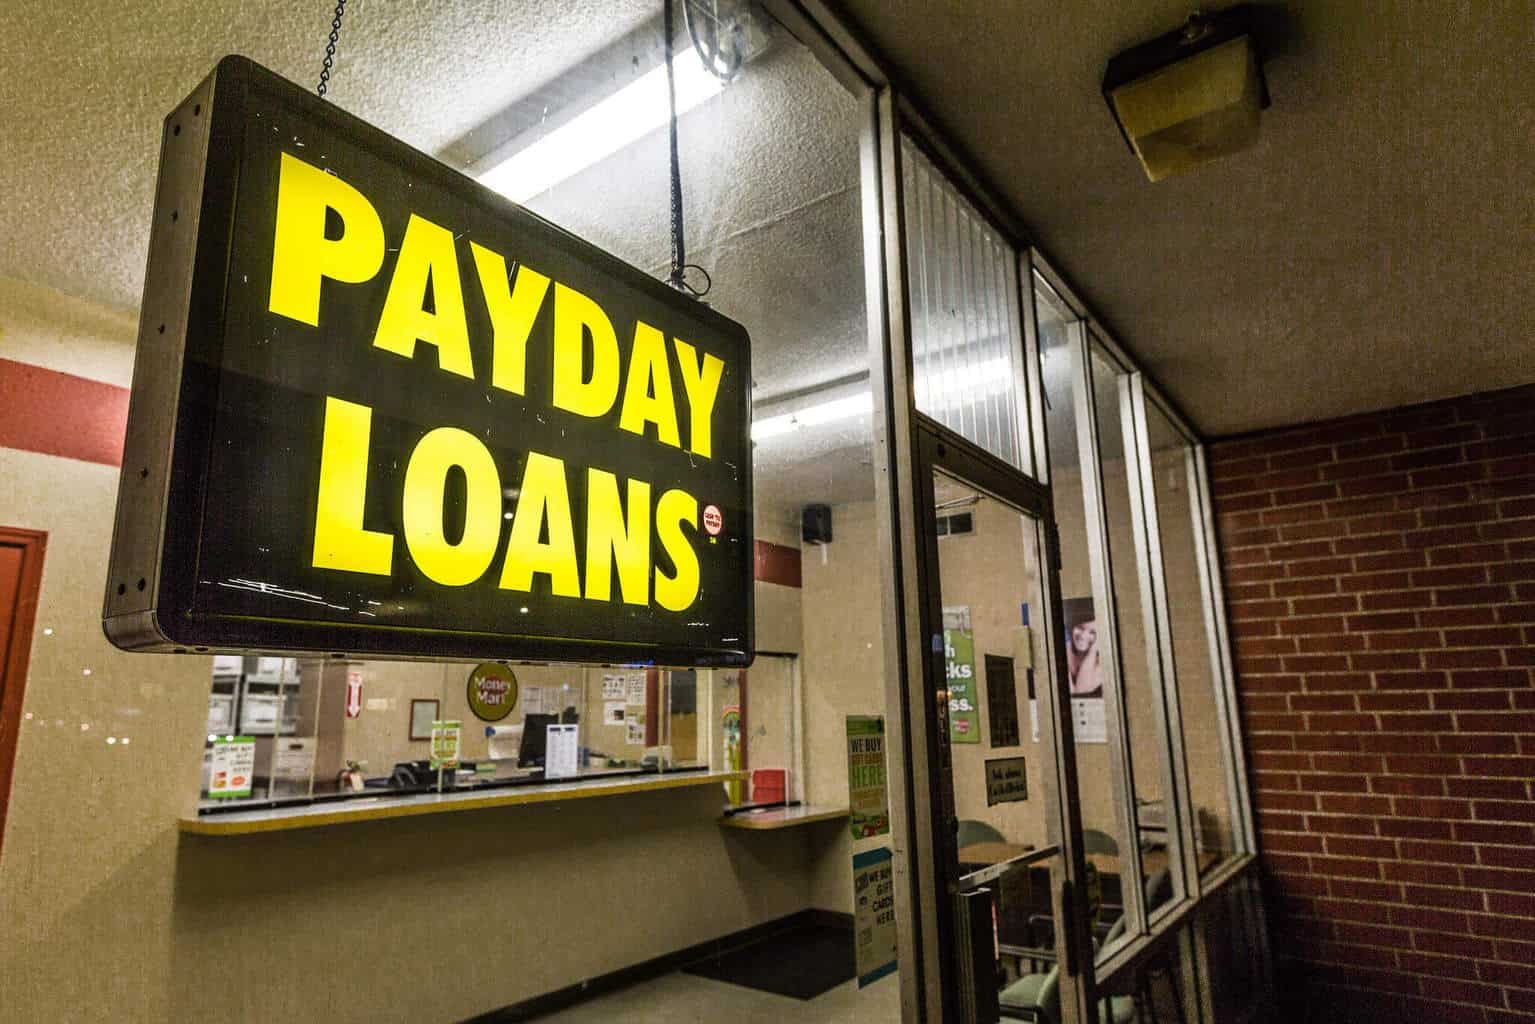 Payday Loans storefront - payday loans